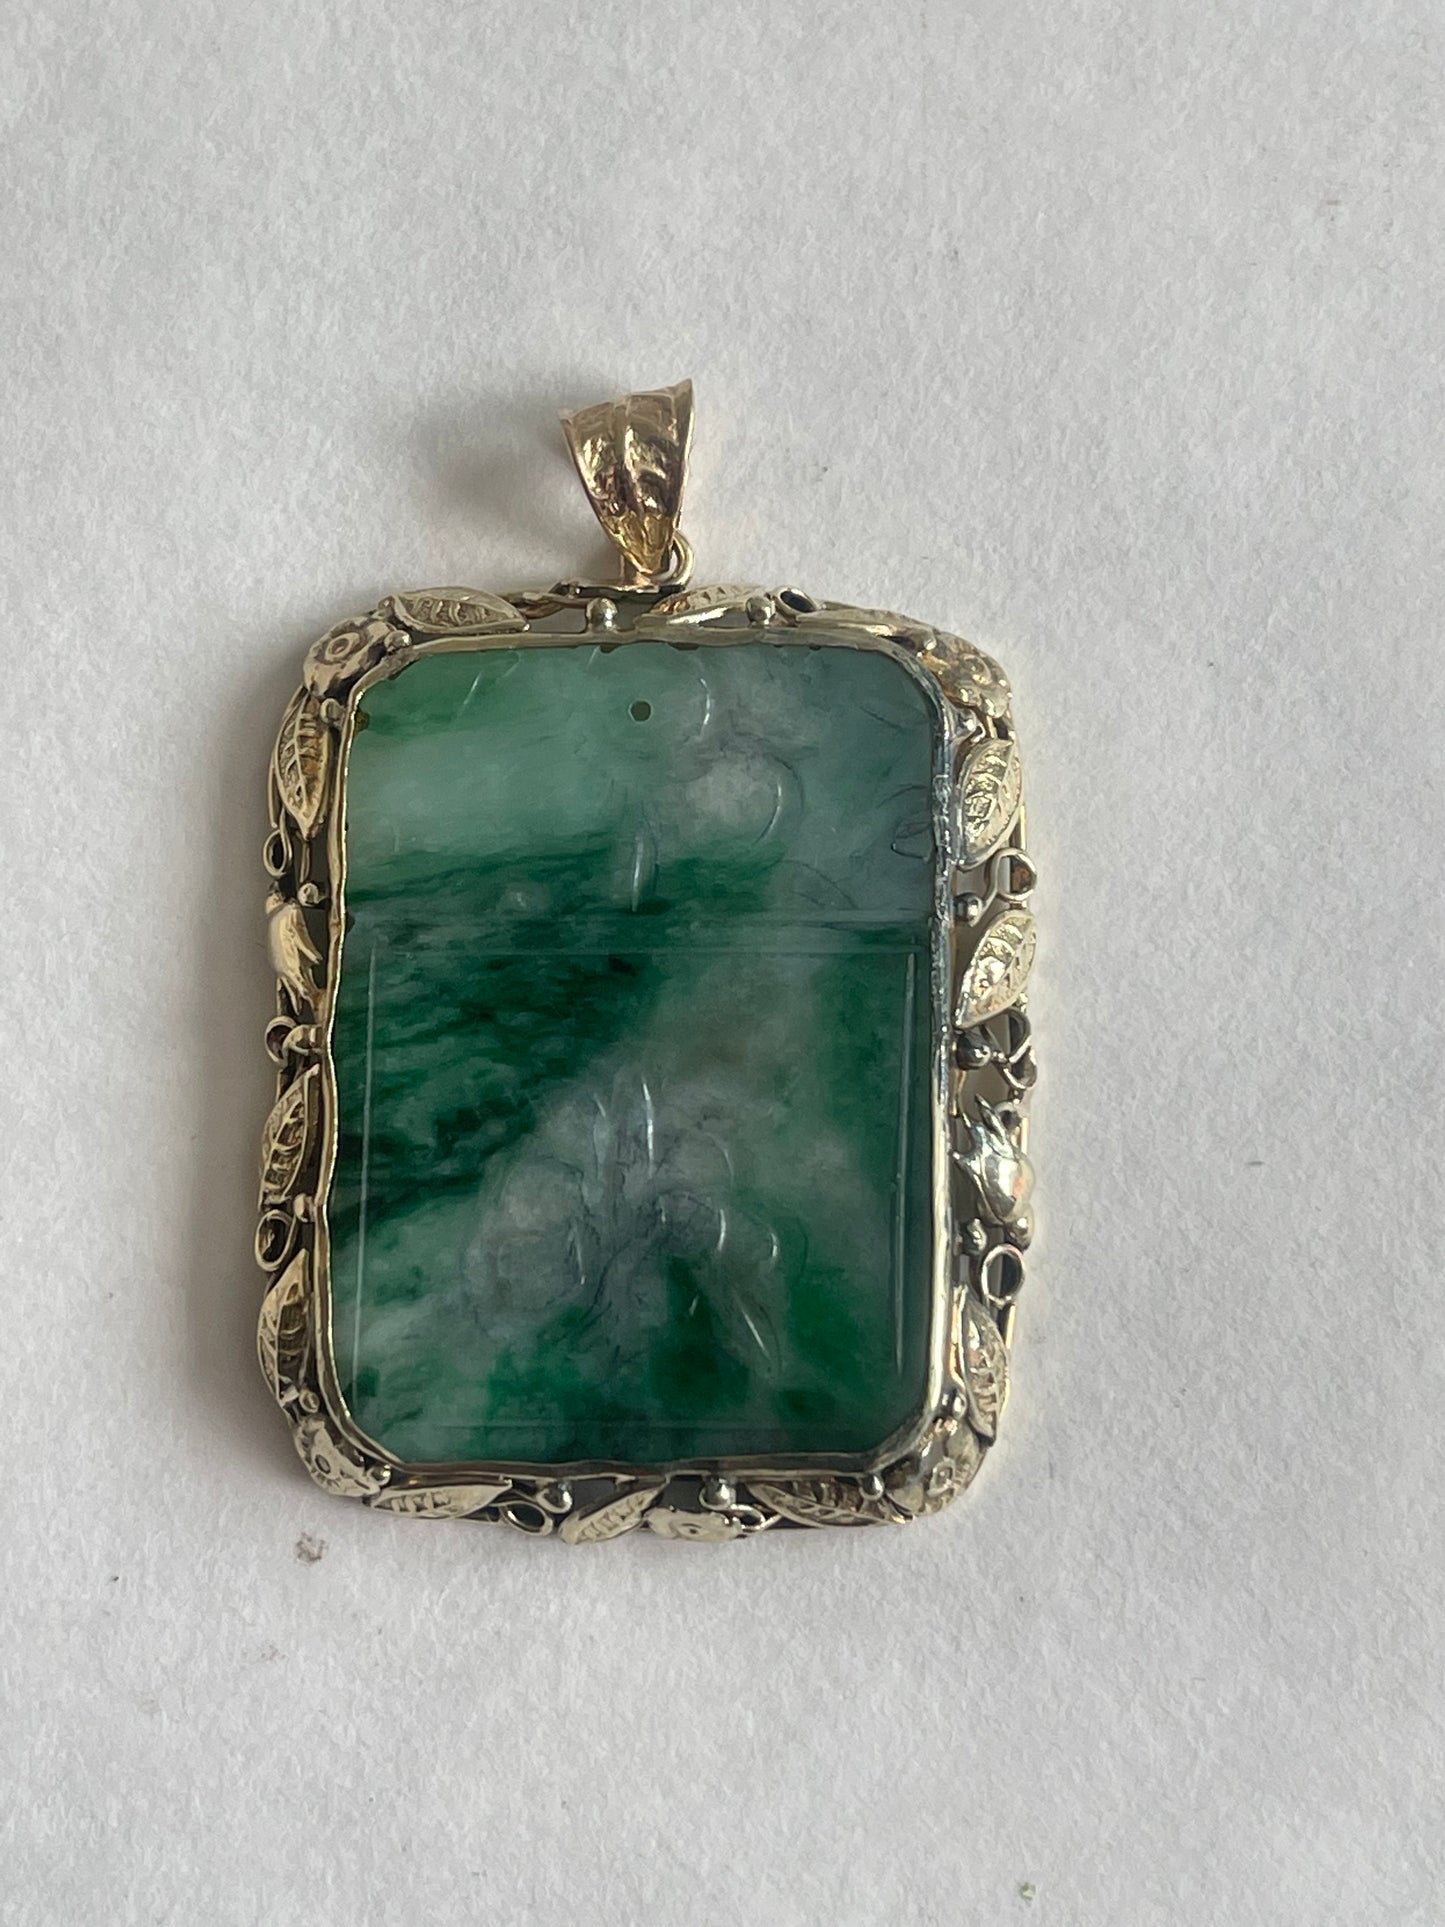 A vintage pendant with a jade plaque in a 10 kt setting